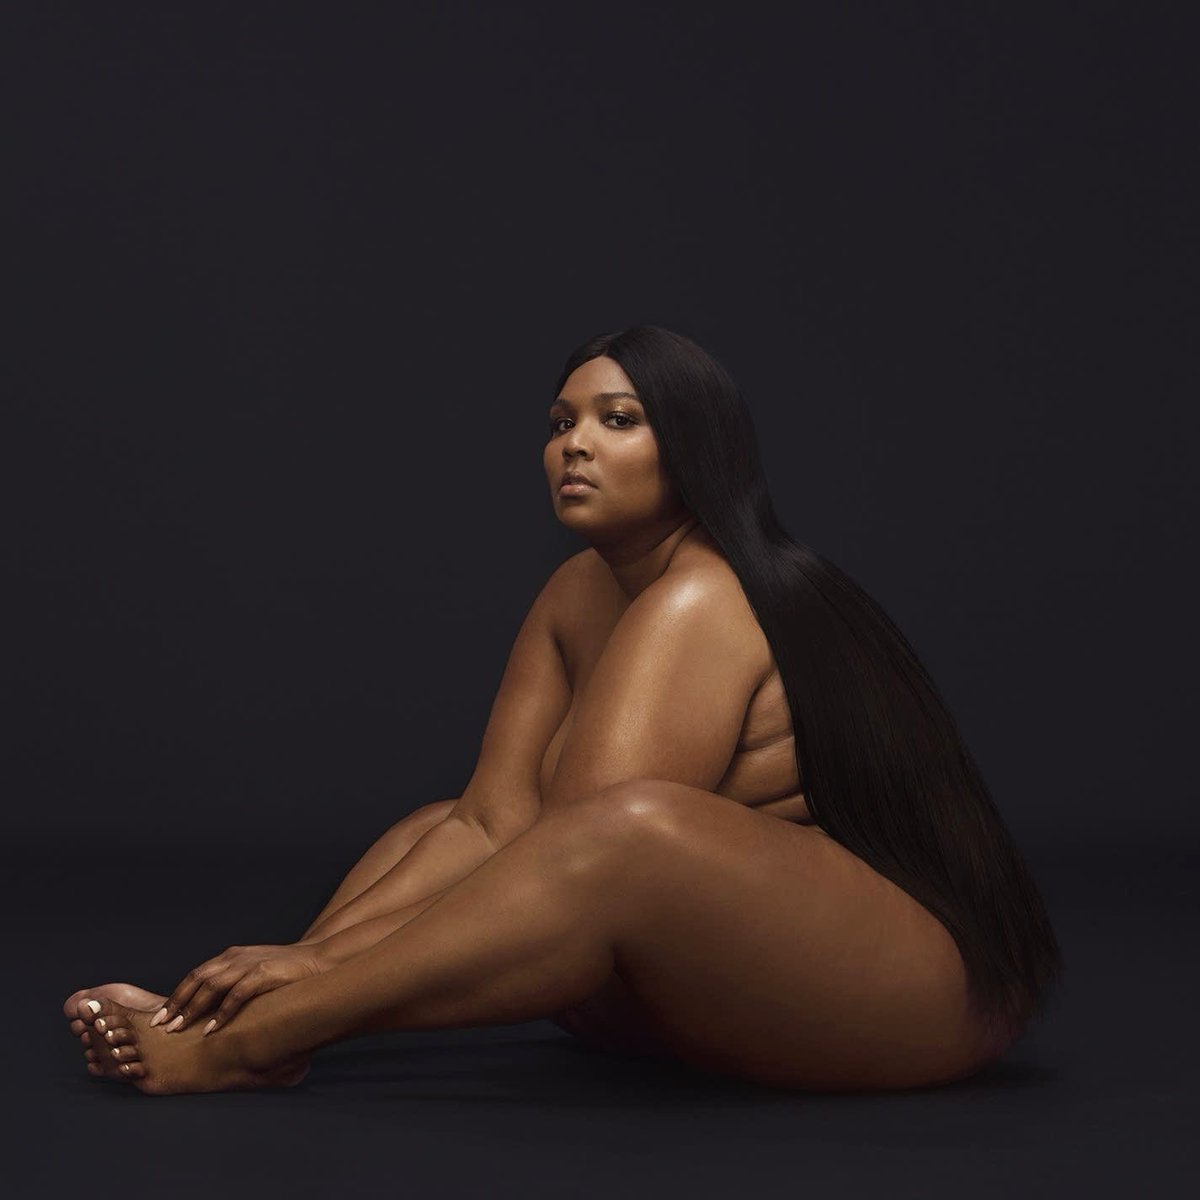 #Lizzo released 'Cuz I Love You' 5 years ago on April 19, 2019 | LISTEN to the album + revisit our review by @BeyondtheEncore here: album.ink/LizzoCILY